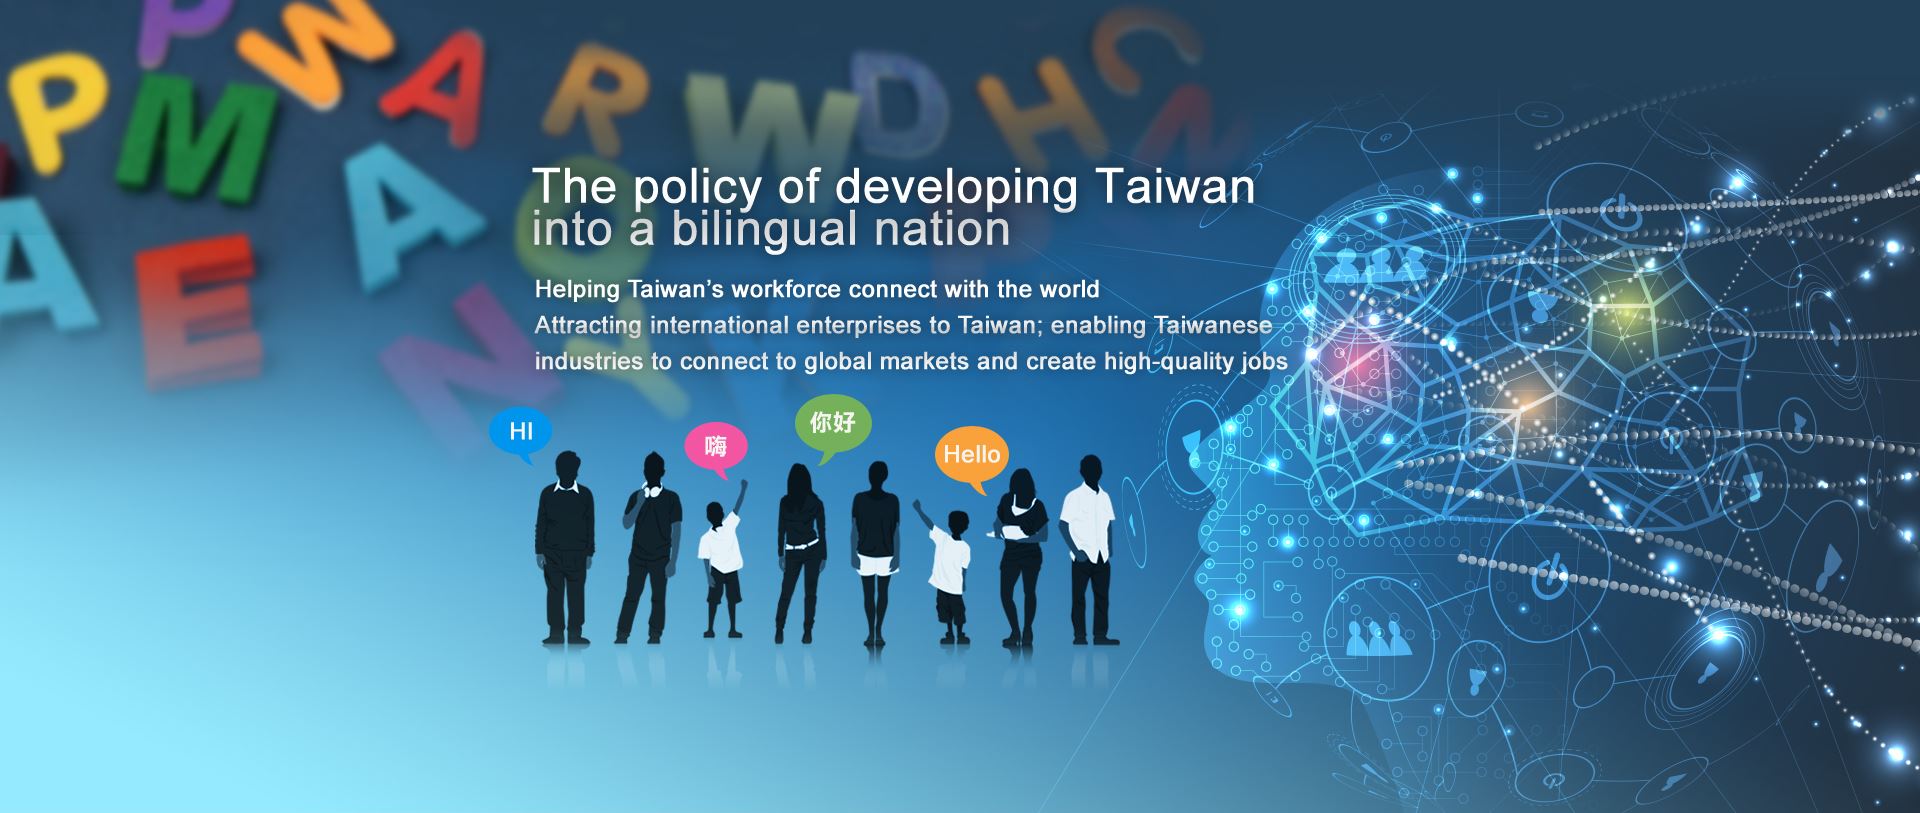 Blueprint for Developing Taiwan into a Bilingual Nation by 2030